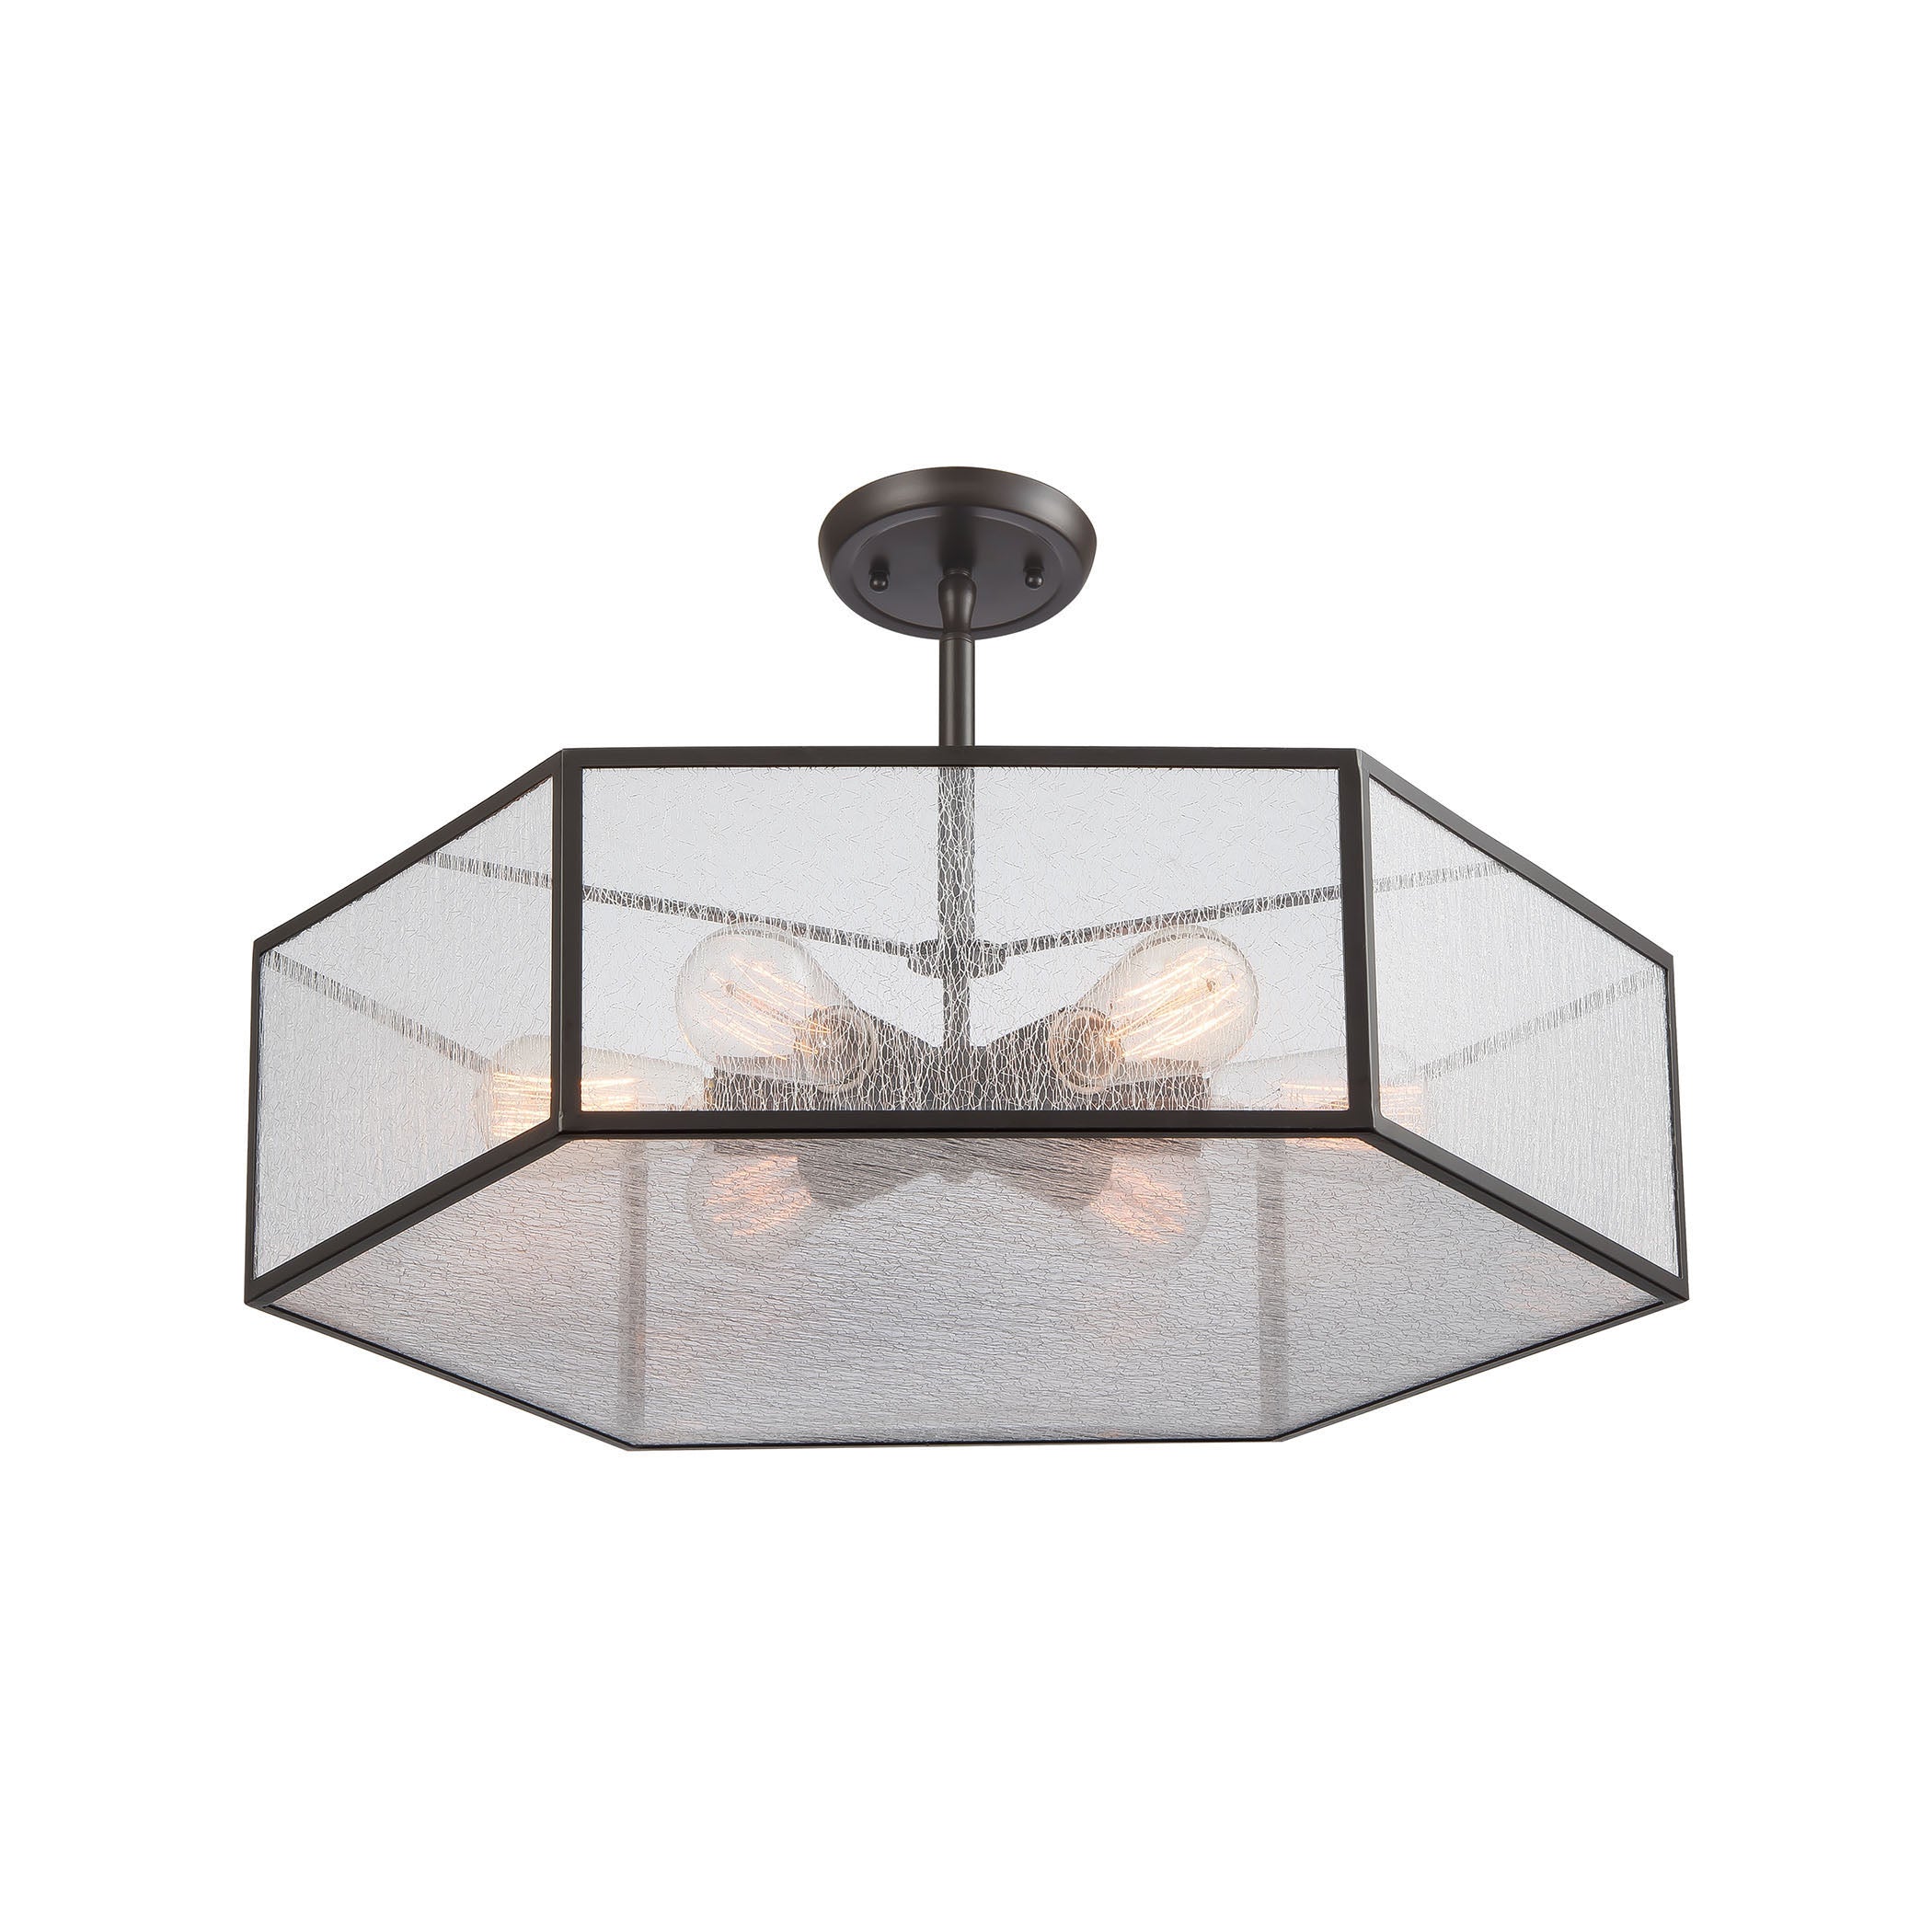 ELK Lighting 10355/6 Spencer 6-Light Chandelier in Oil Rubbed Bronze with Translucent Organza PVC Shade